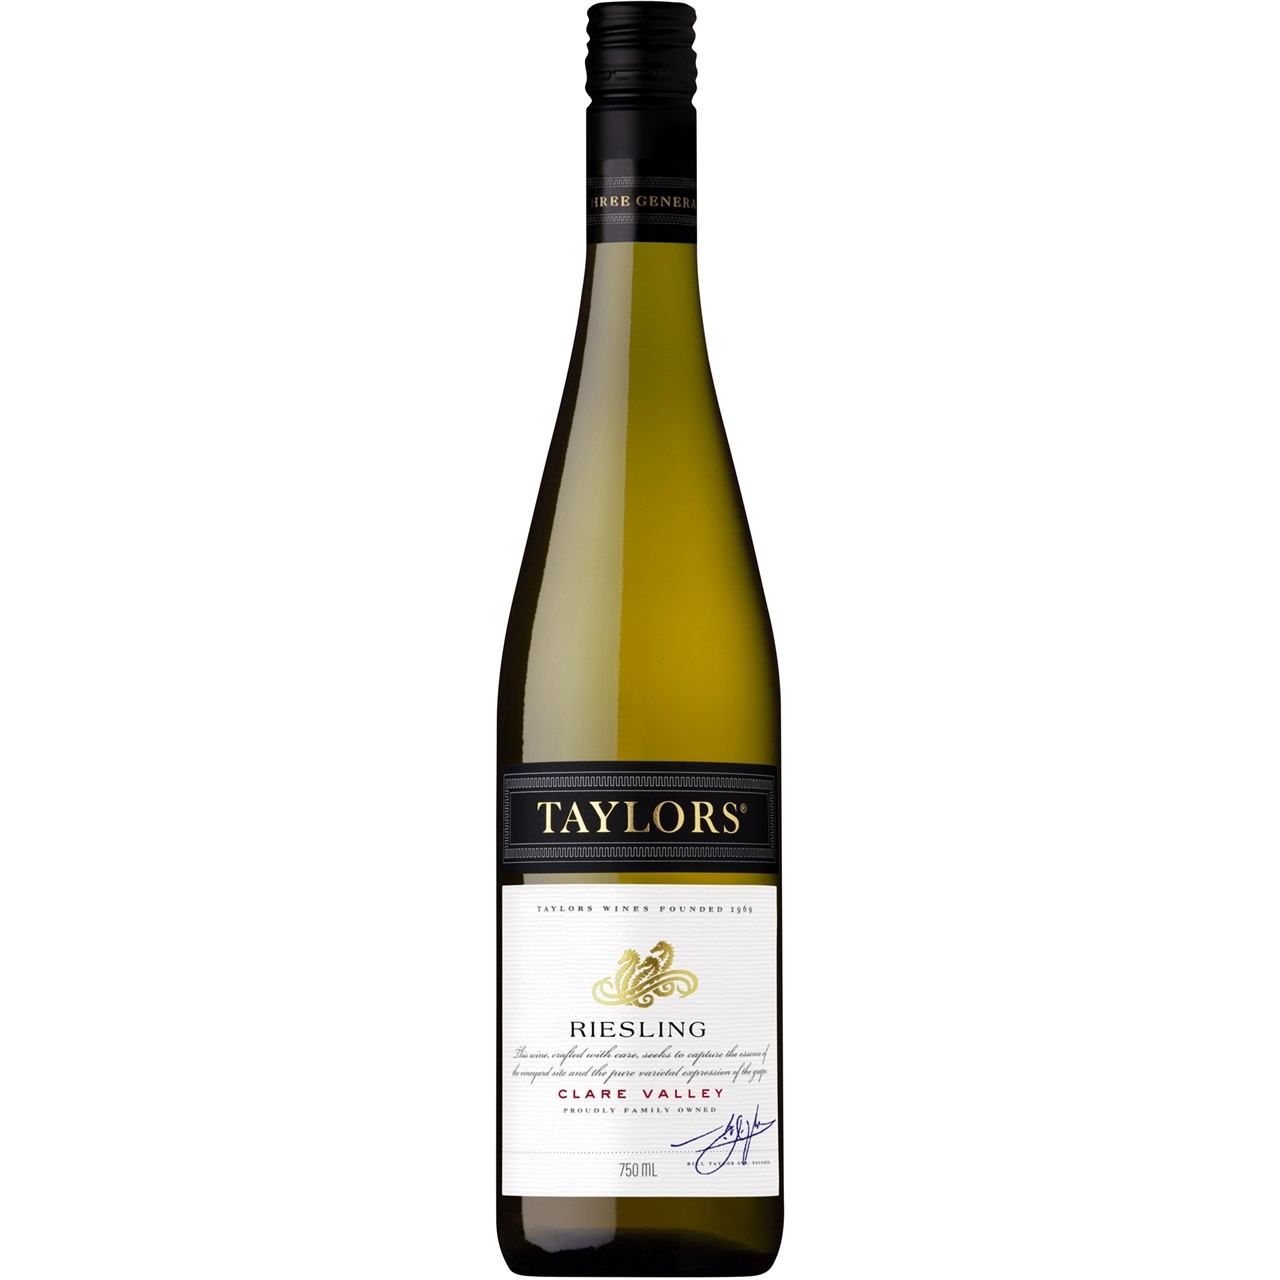 Taylors Estate Riesling